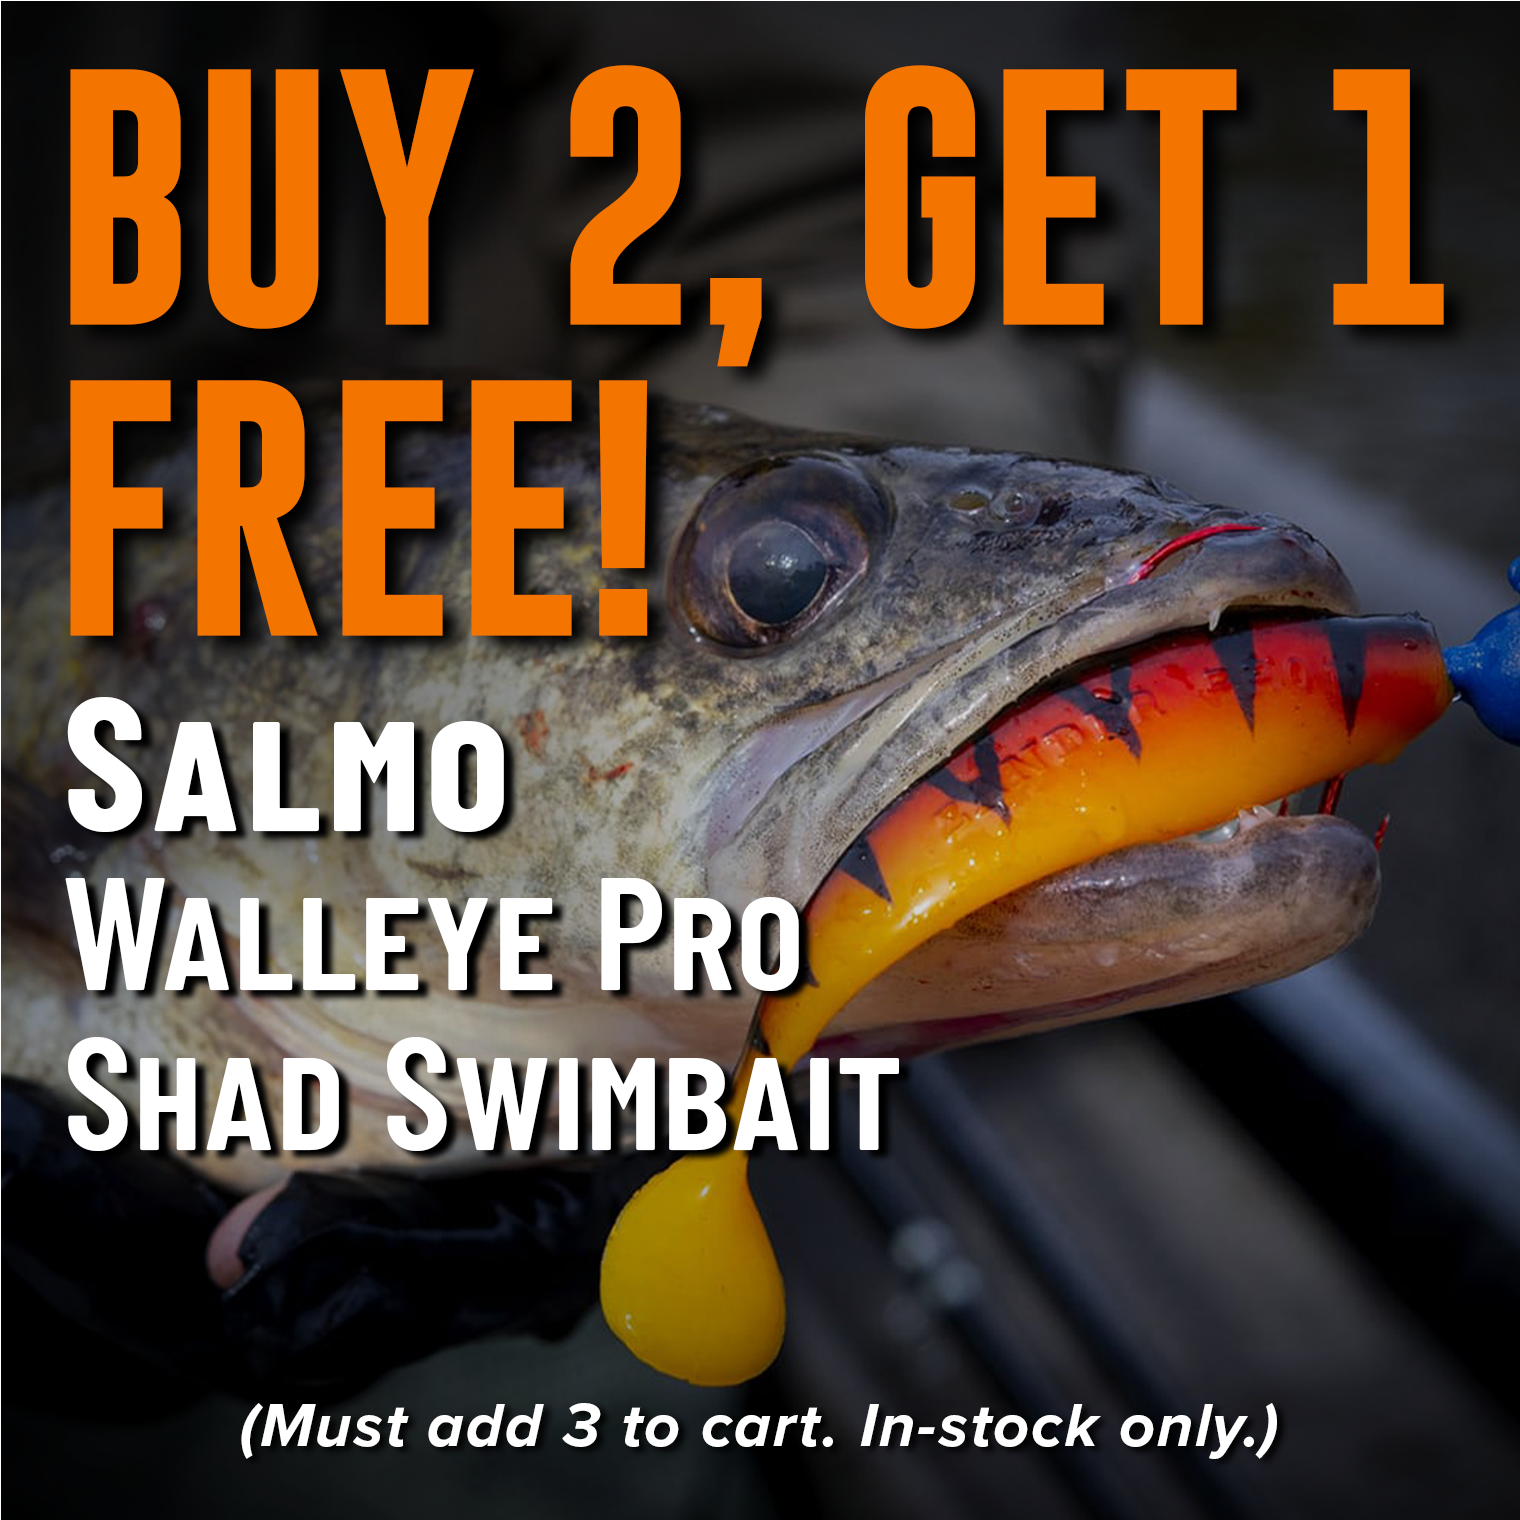 Buy 2, Get 1 Free! Salmo Walleye Pro Shad Swimbait (Must add 3 to cart. In-stock only.)